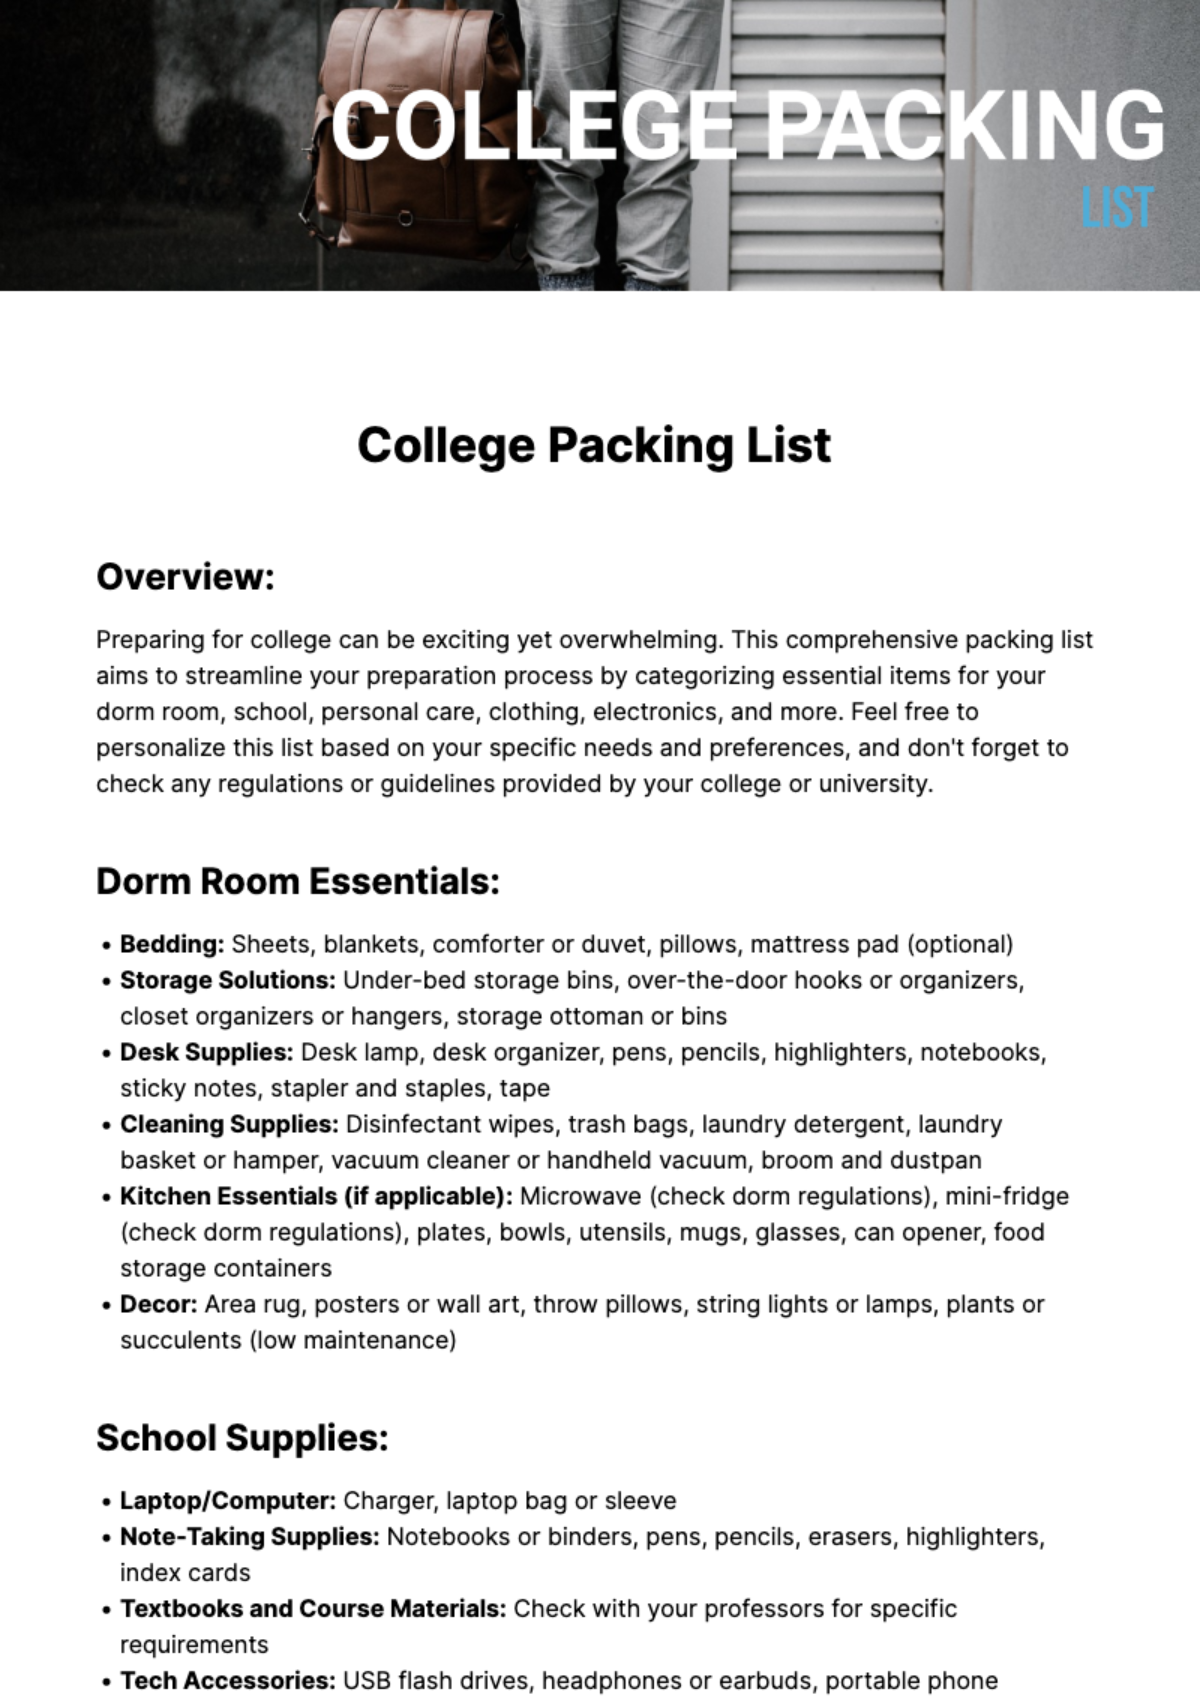 College Packing List Template